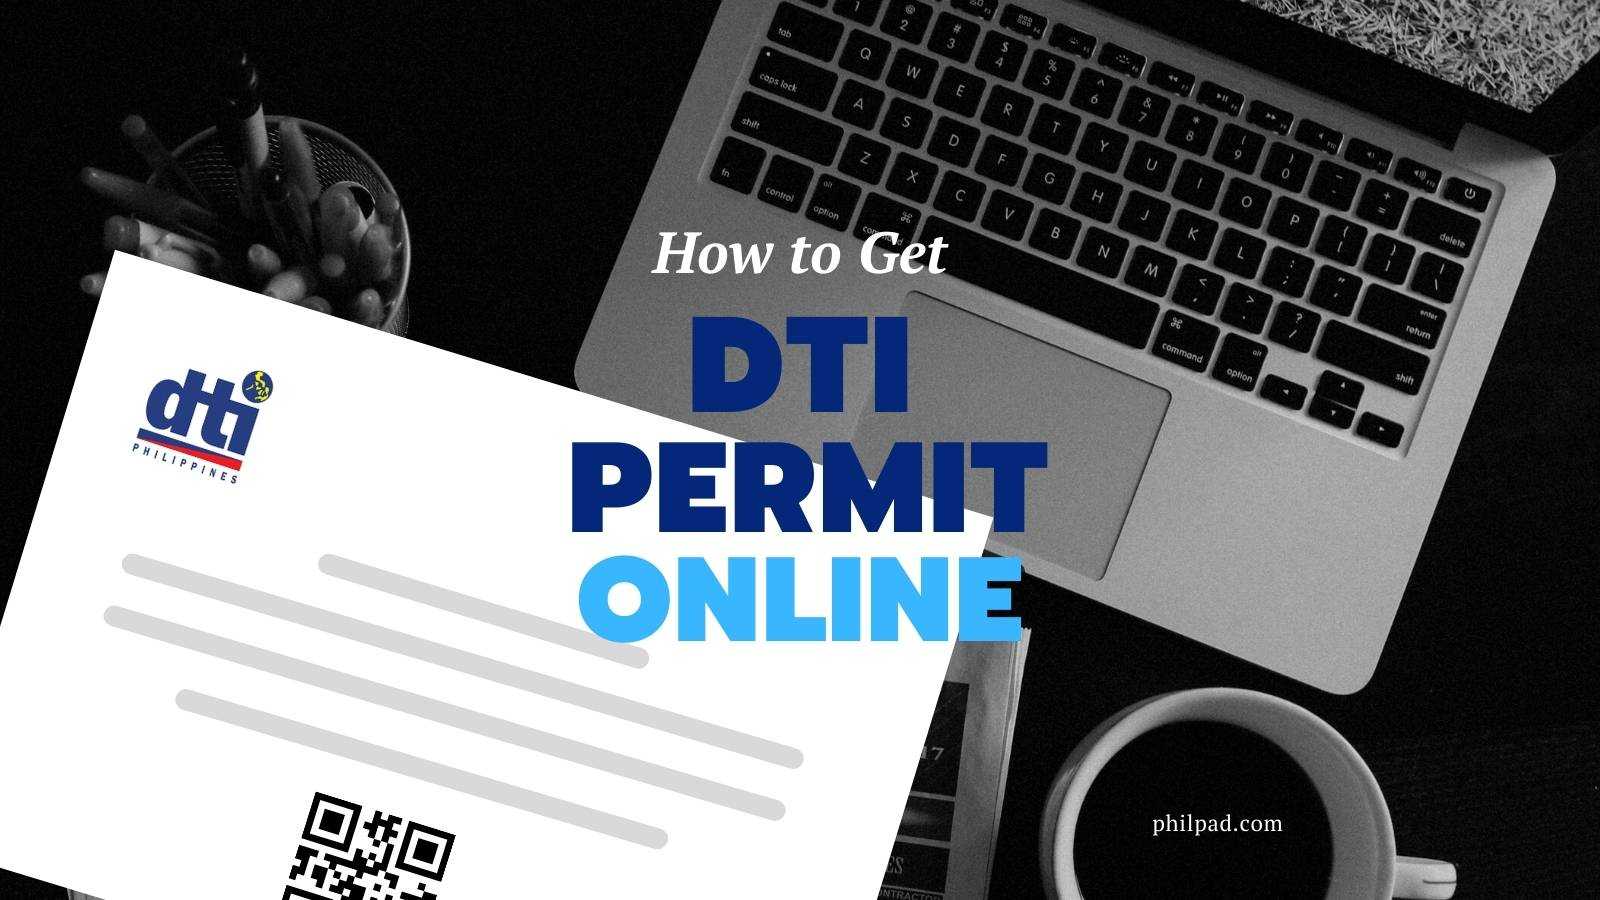 how to get dti permit online for business